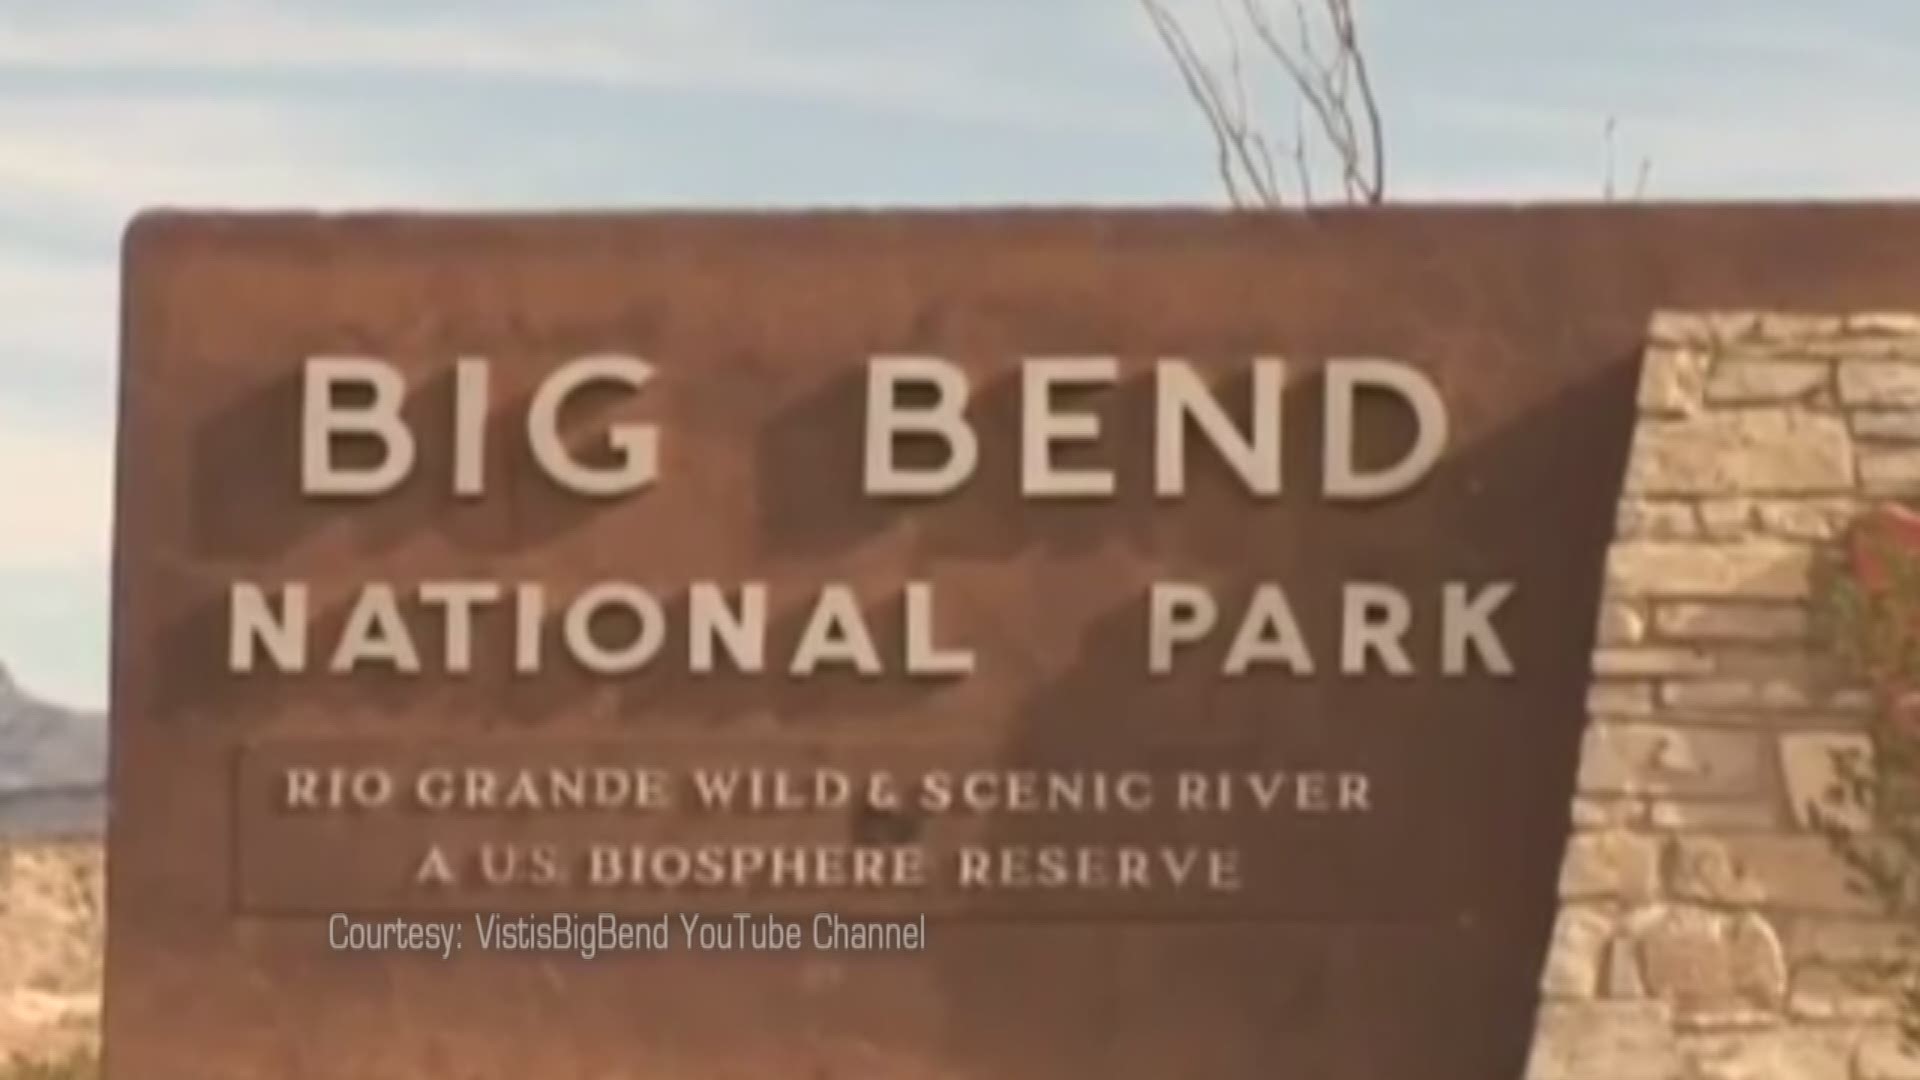 The soldier was on a visit to Big Bend National Park with members of his unit from Fort Bliss.